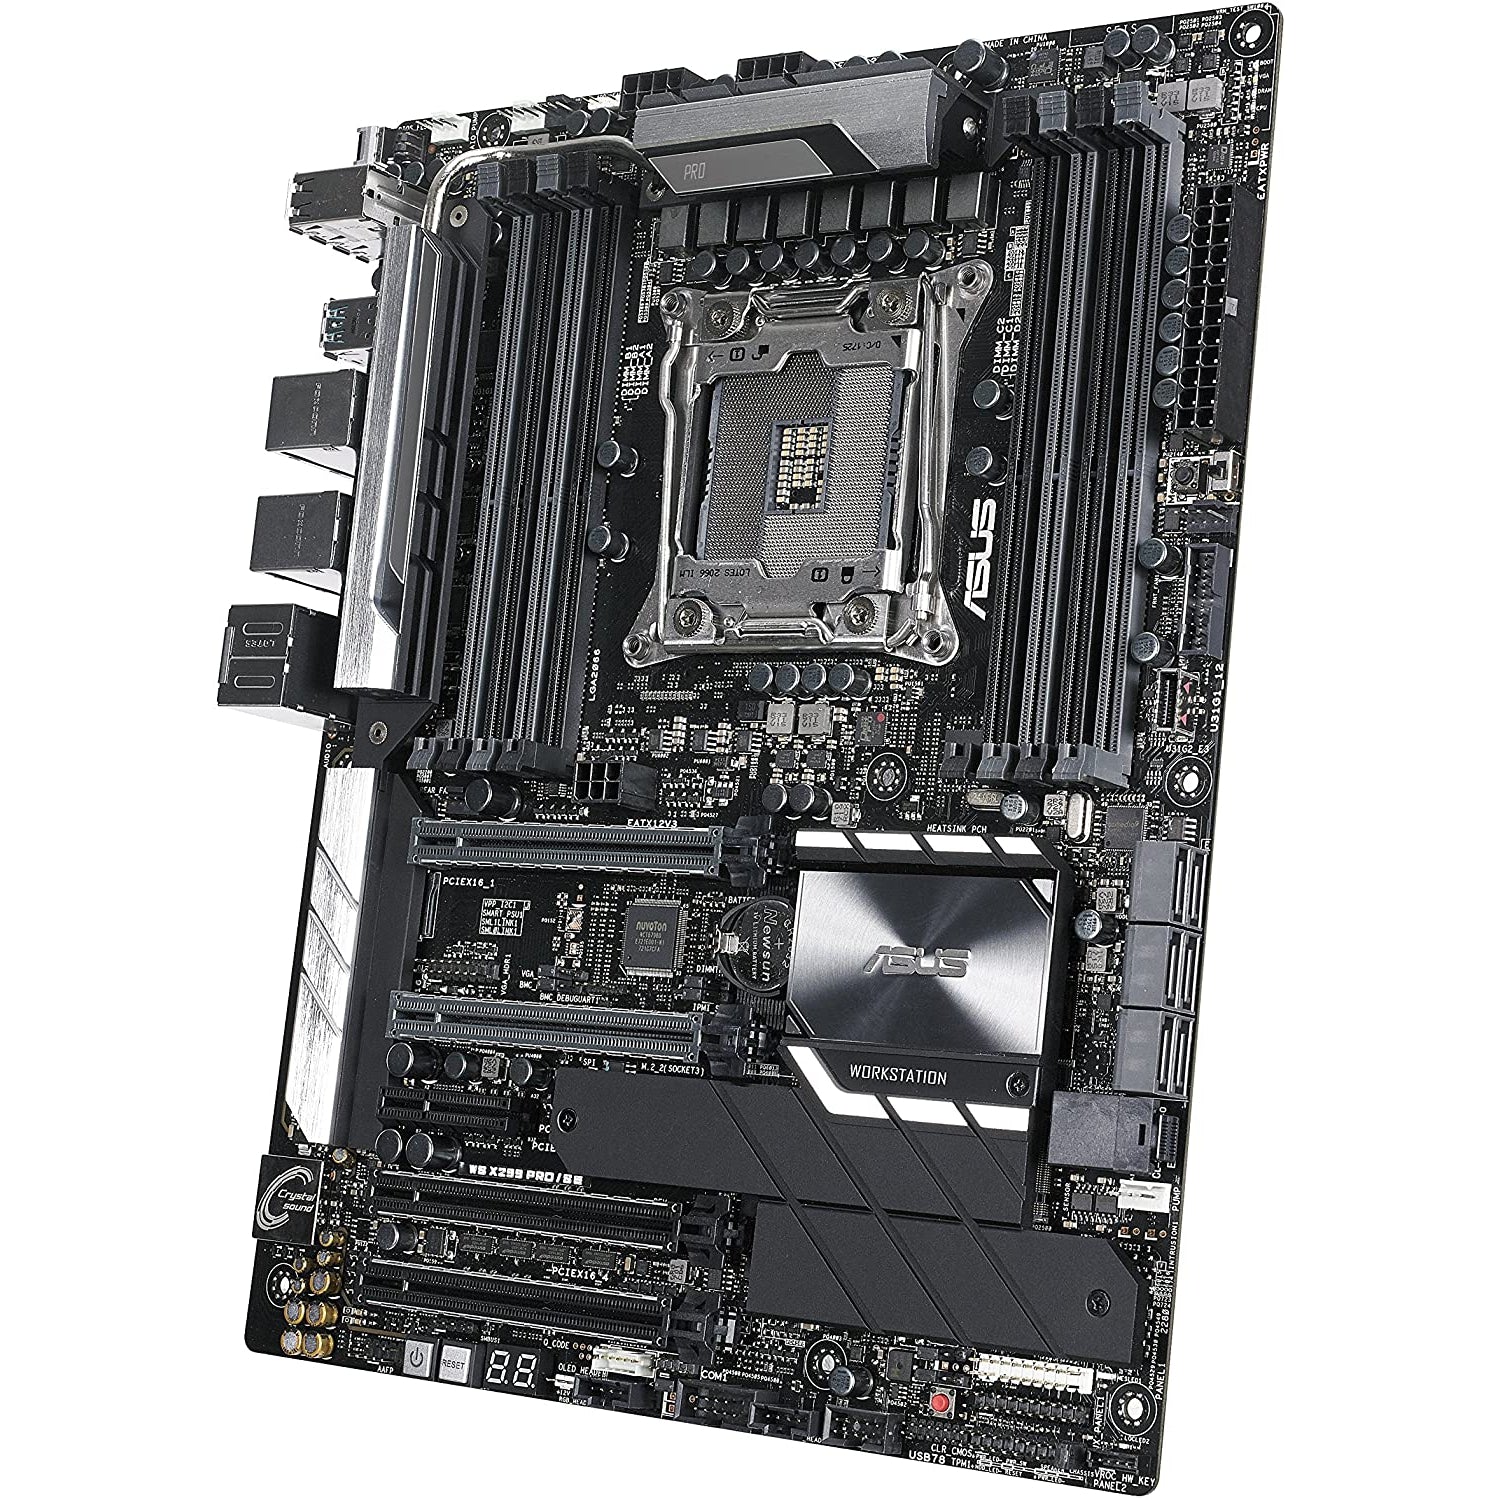 ASUS WS X299 PRO/SE 2066 Intel X299 ATX Workstation Motherboard 90SW00A0-M0EAY0 - Excellent